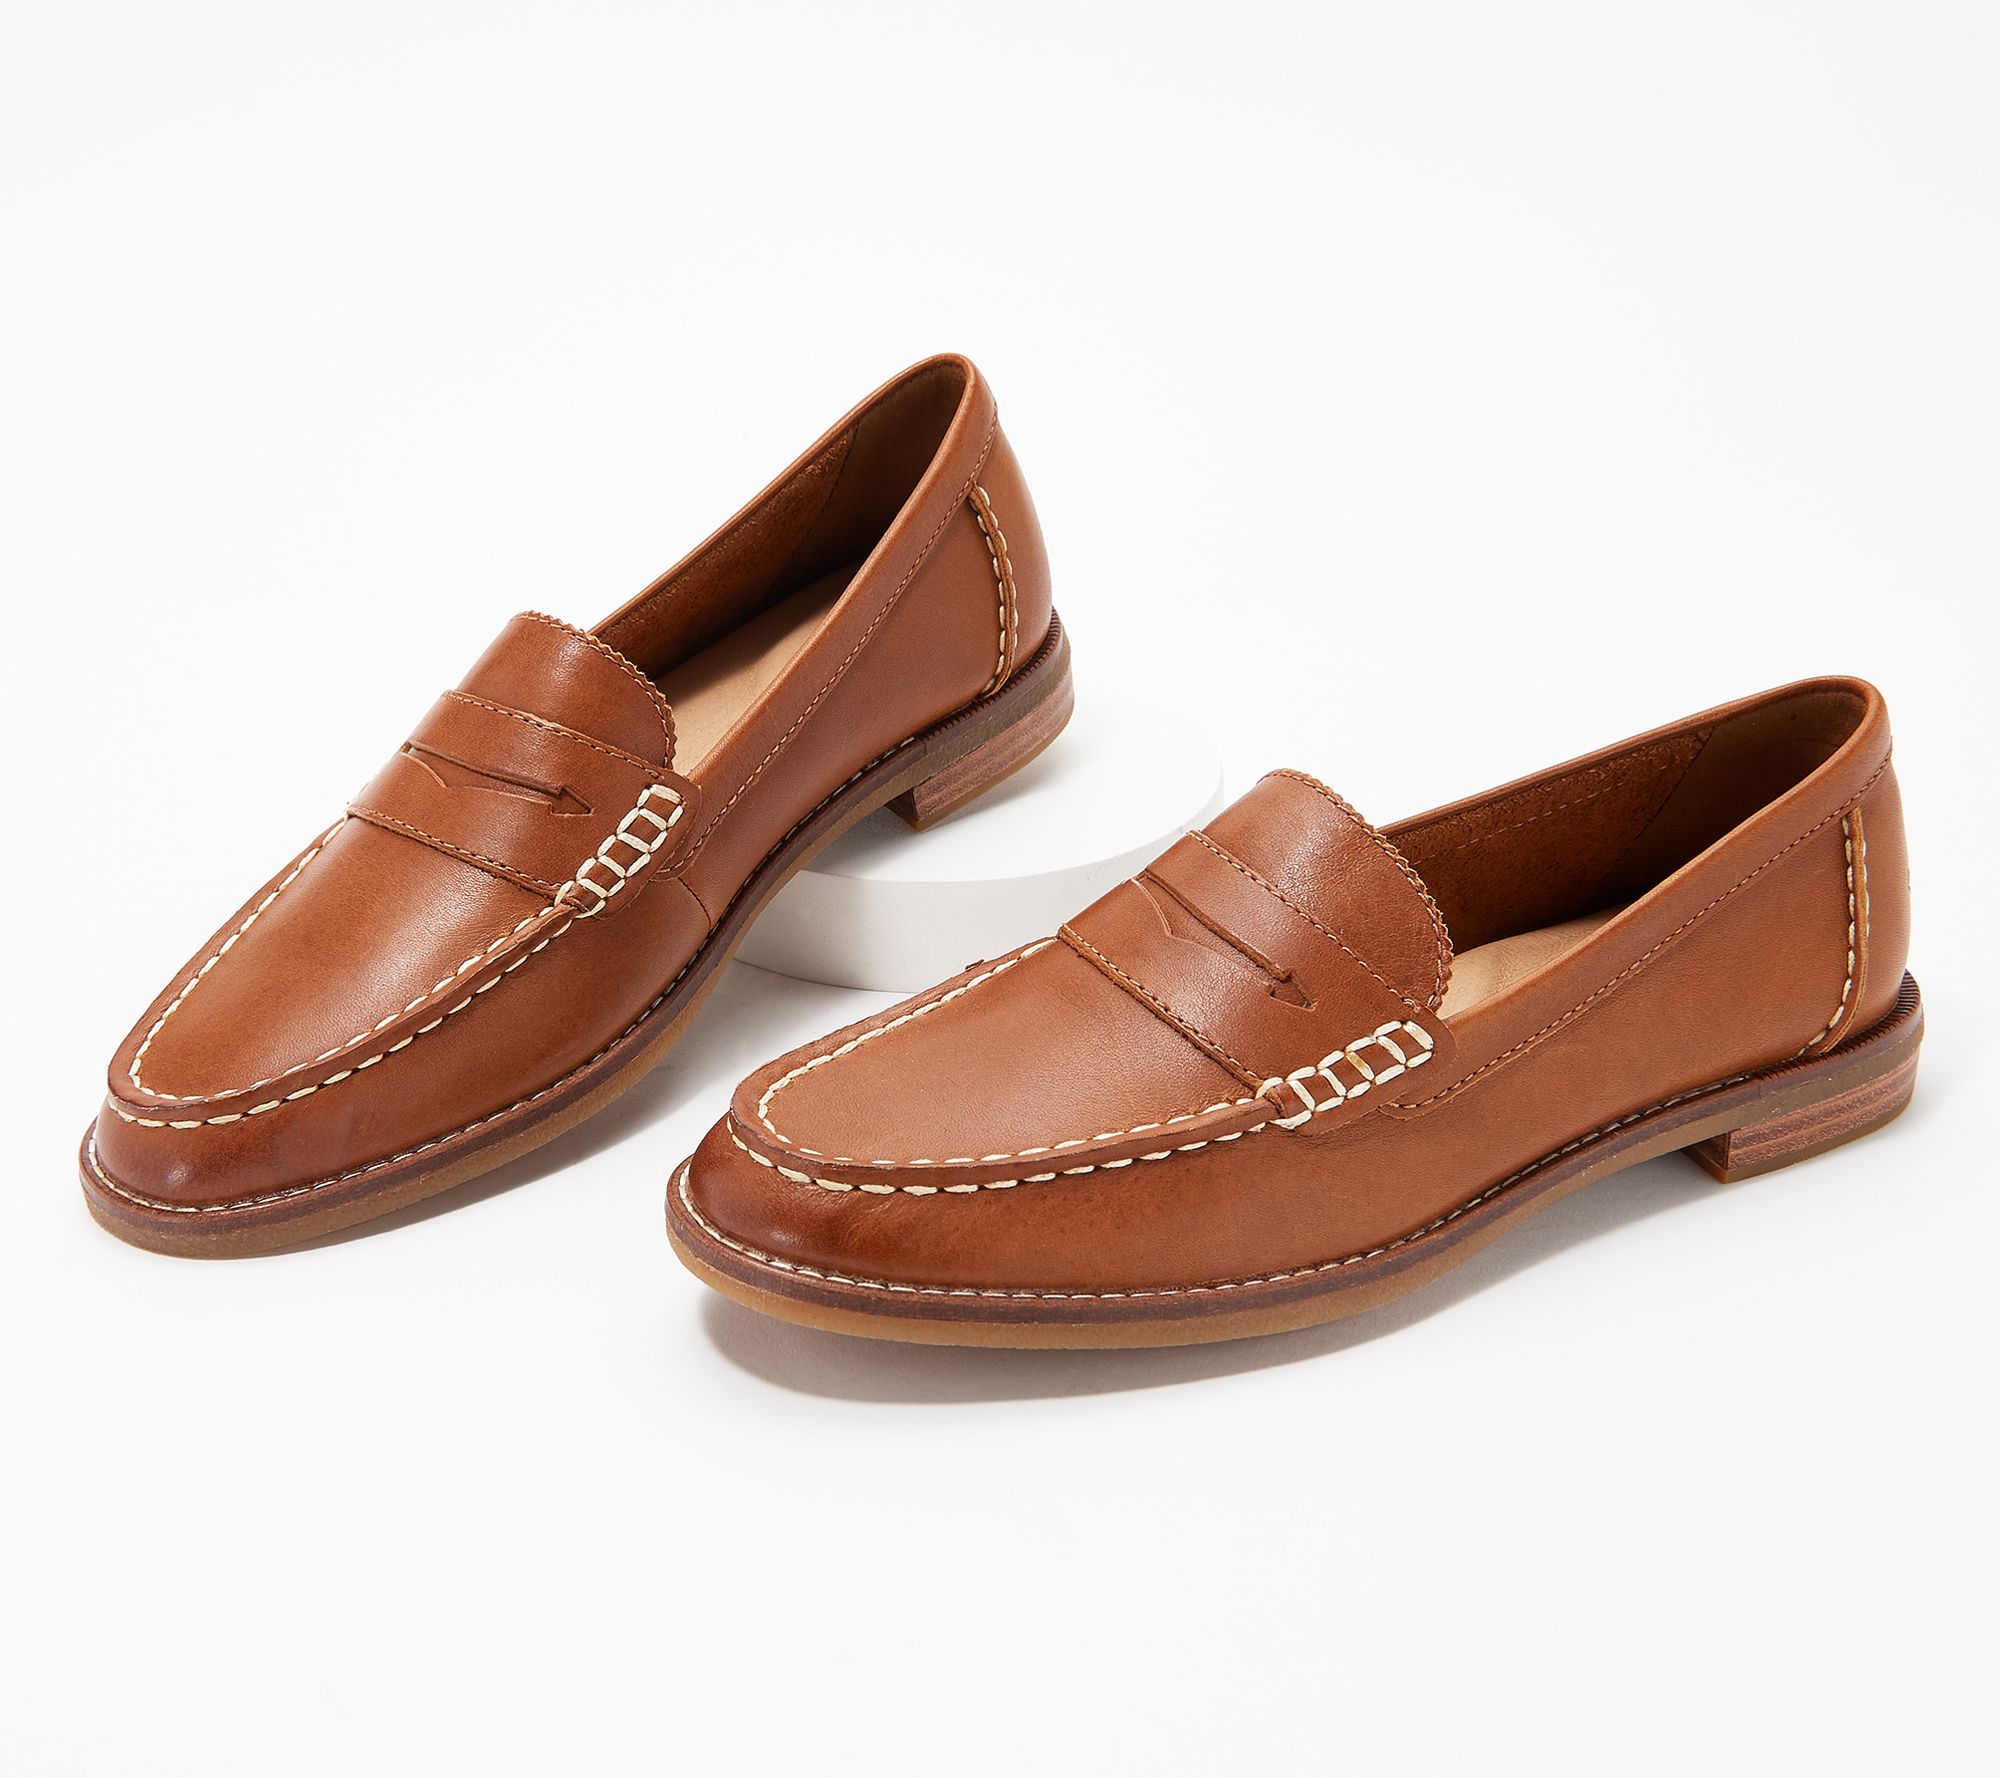 penny loafer sneakers